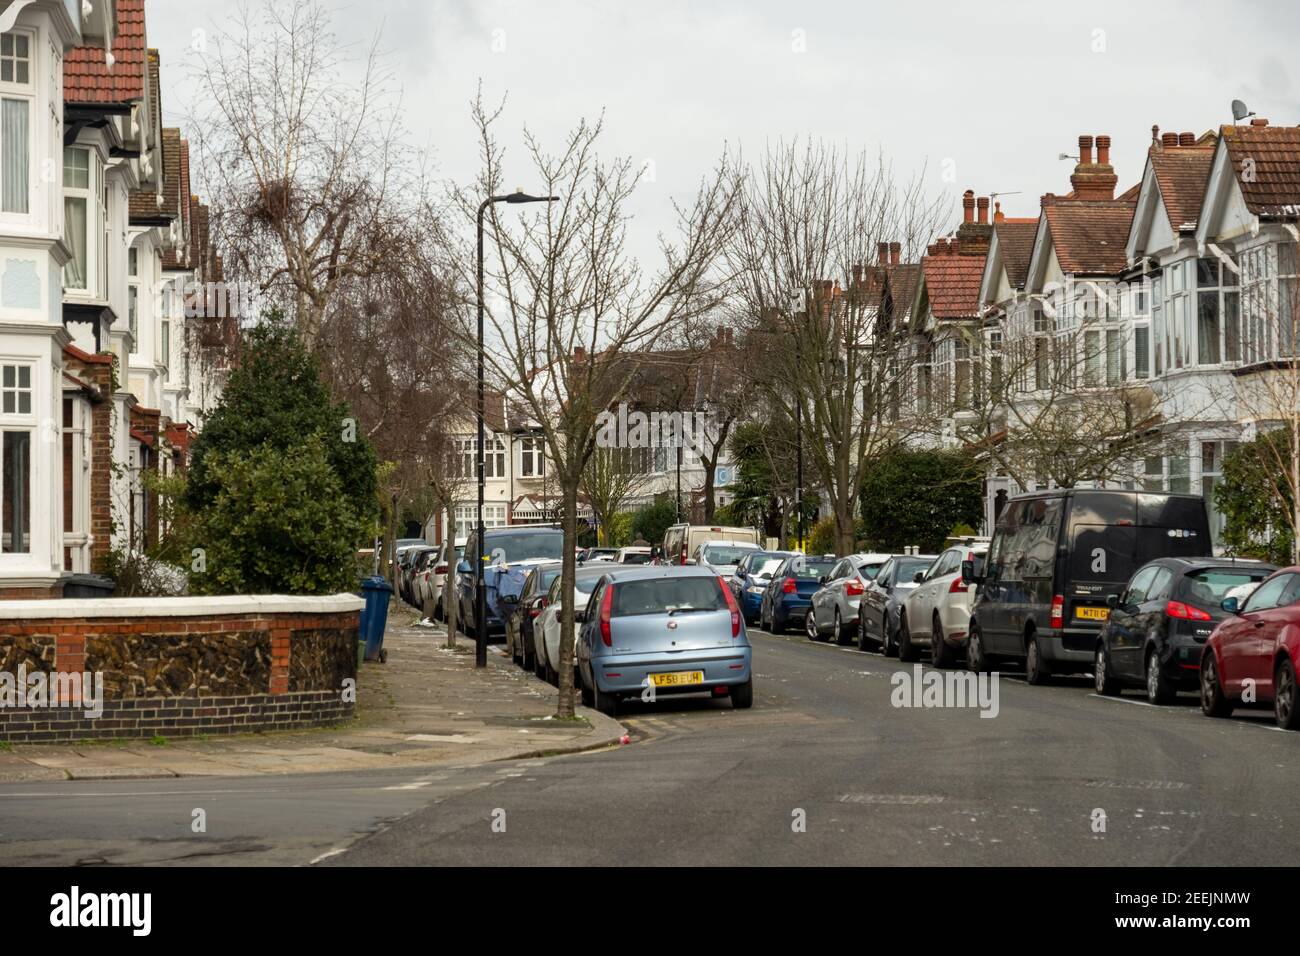 London- Street of terraced houses in Ealing Common area of west London Stock Photo